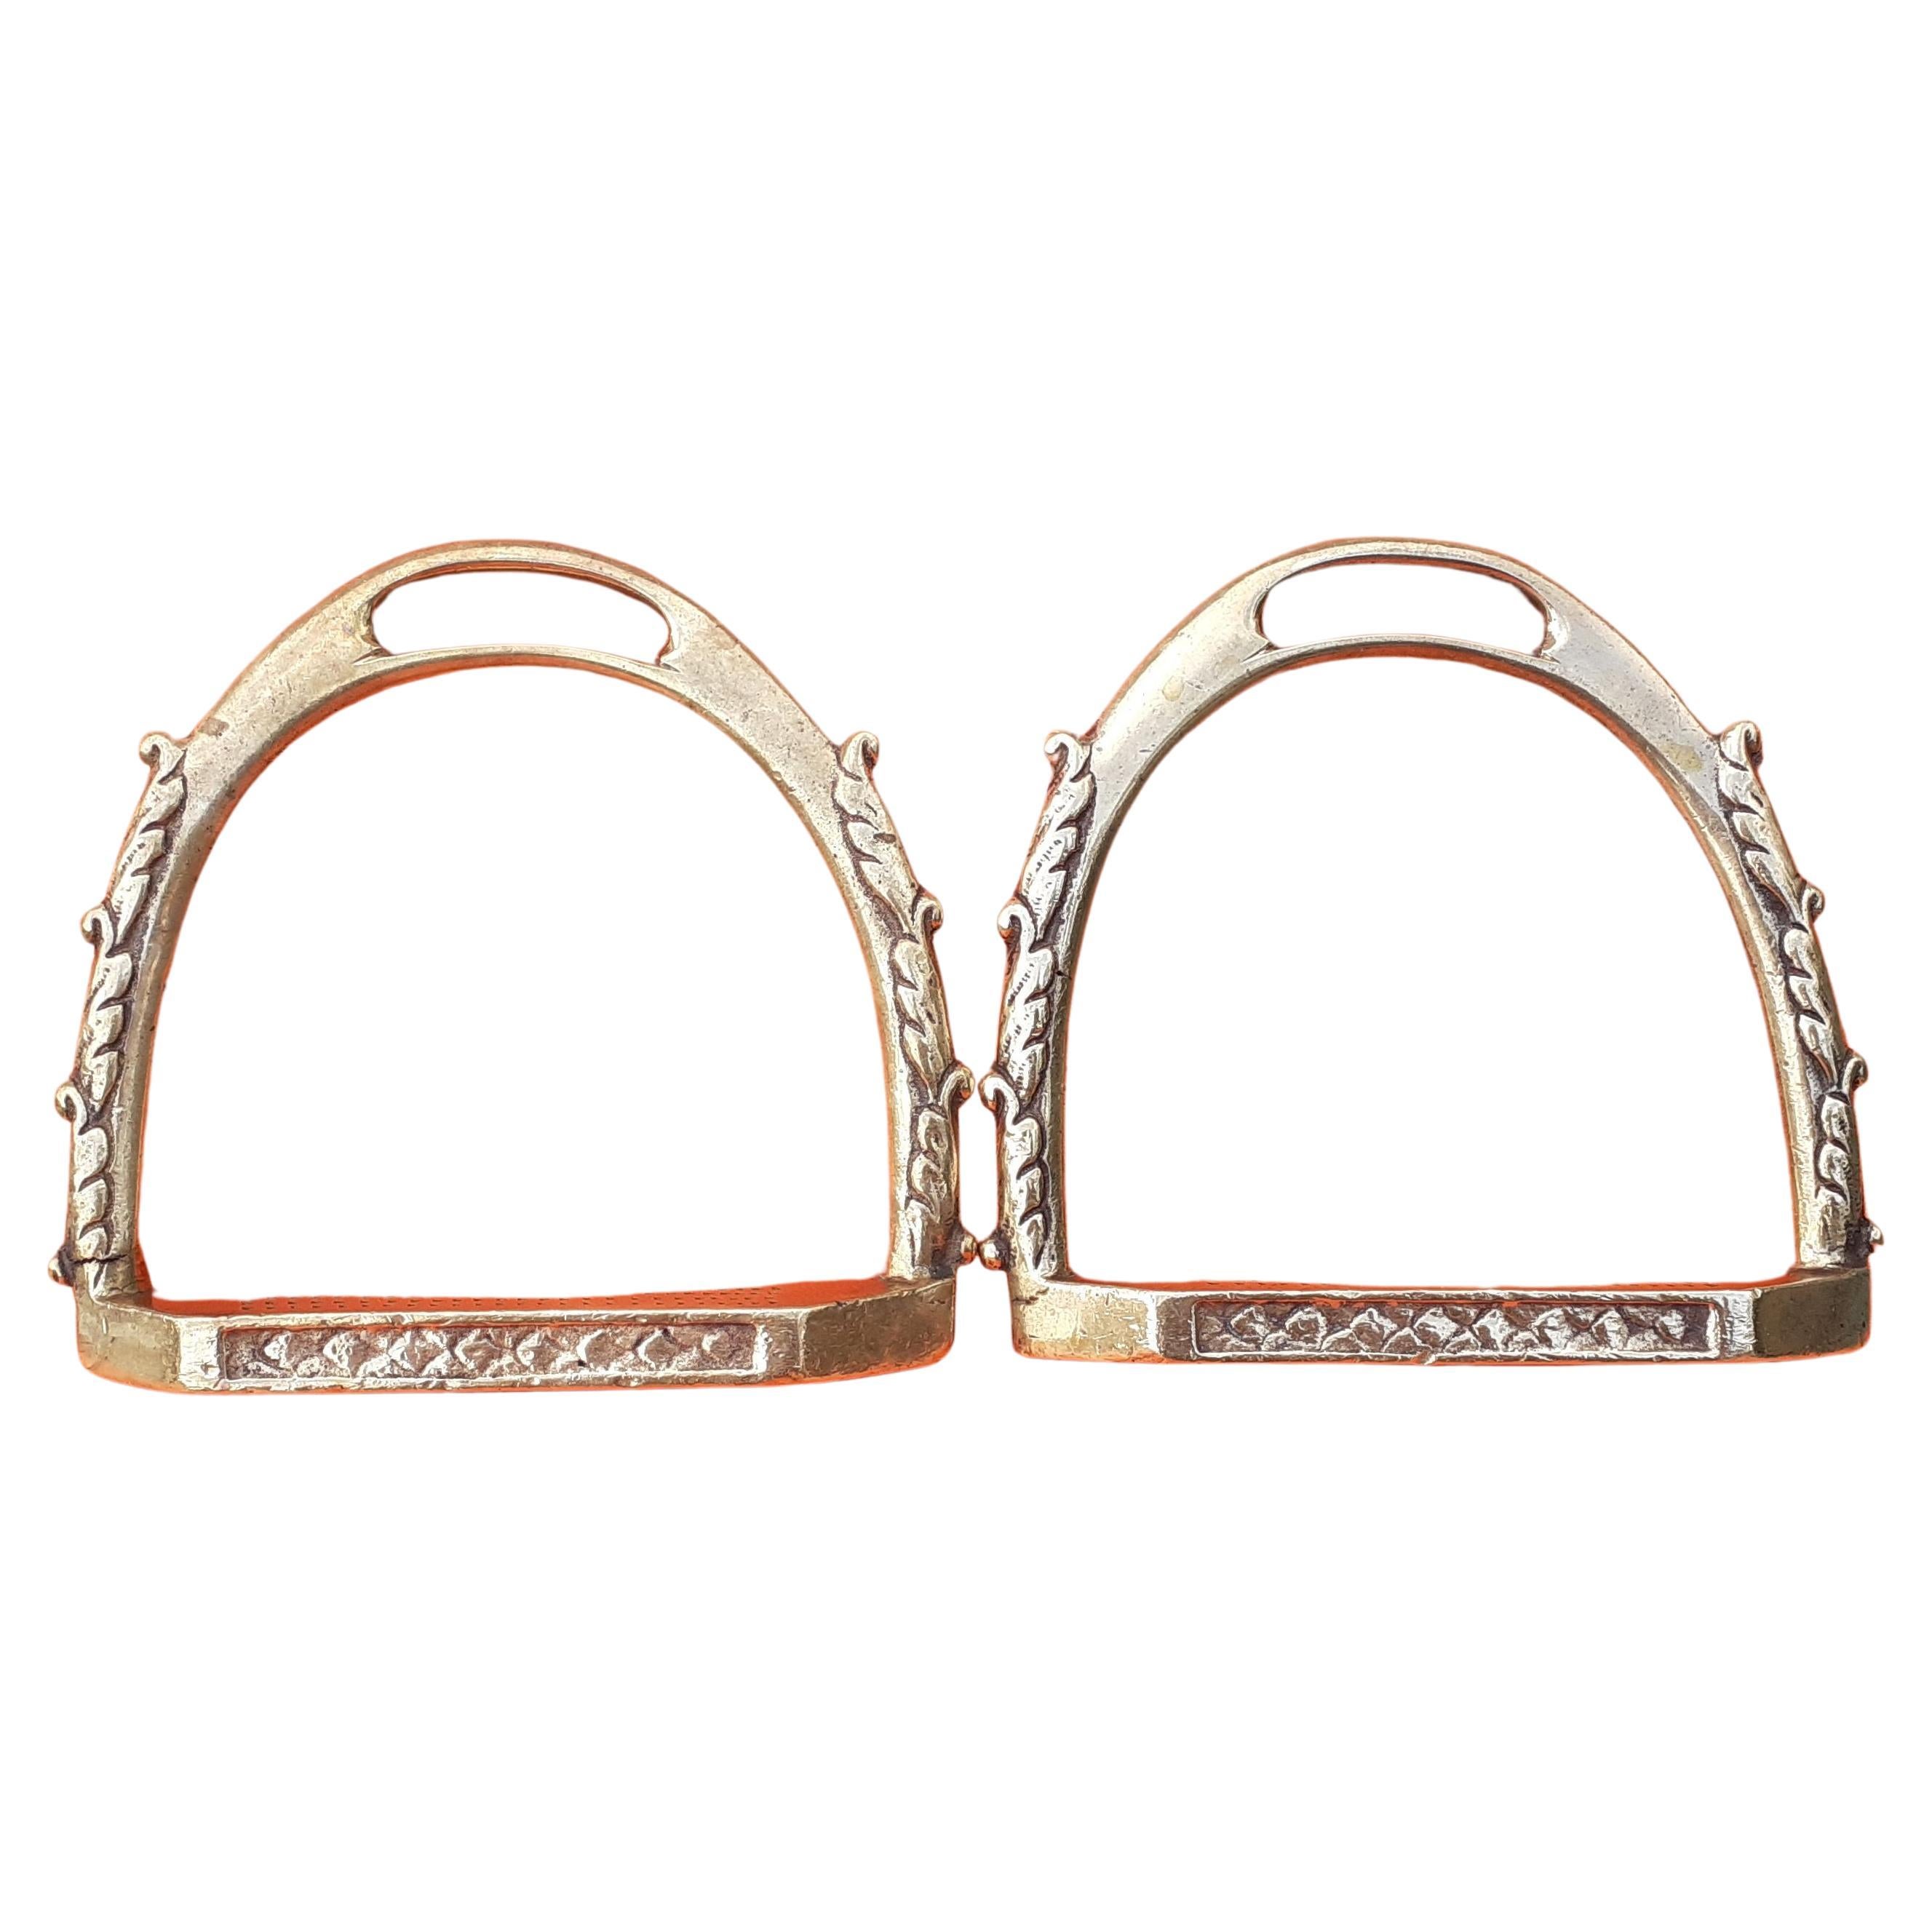 Beaituful Rare Authentic Hermès Stirrups

Set of 2 

Real stirrups for horse ridding

Vintage items

Made of chiseled bronze

Colorway: golden

